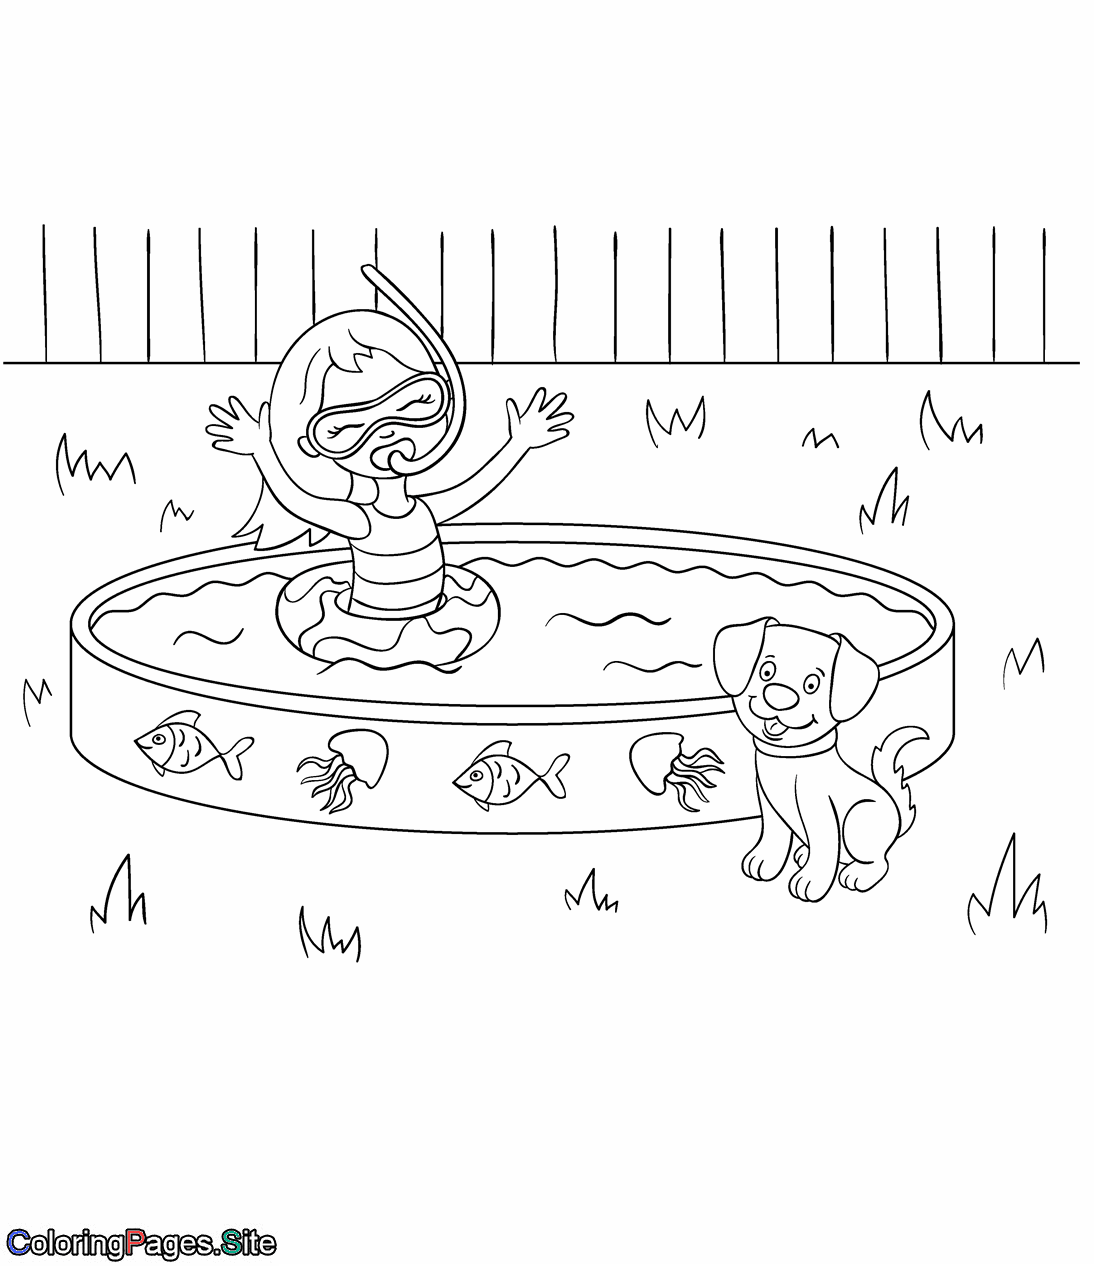 Girl swimming in a home pool coloring page